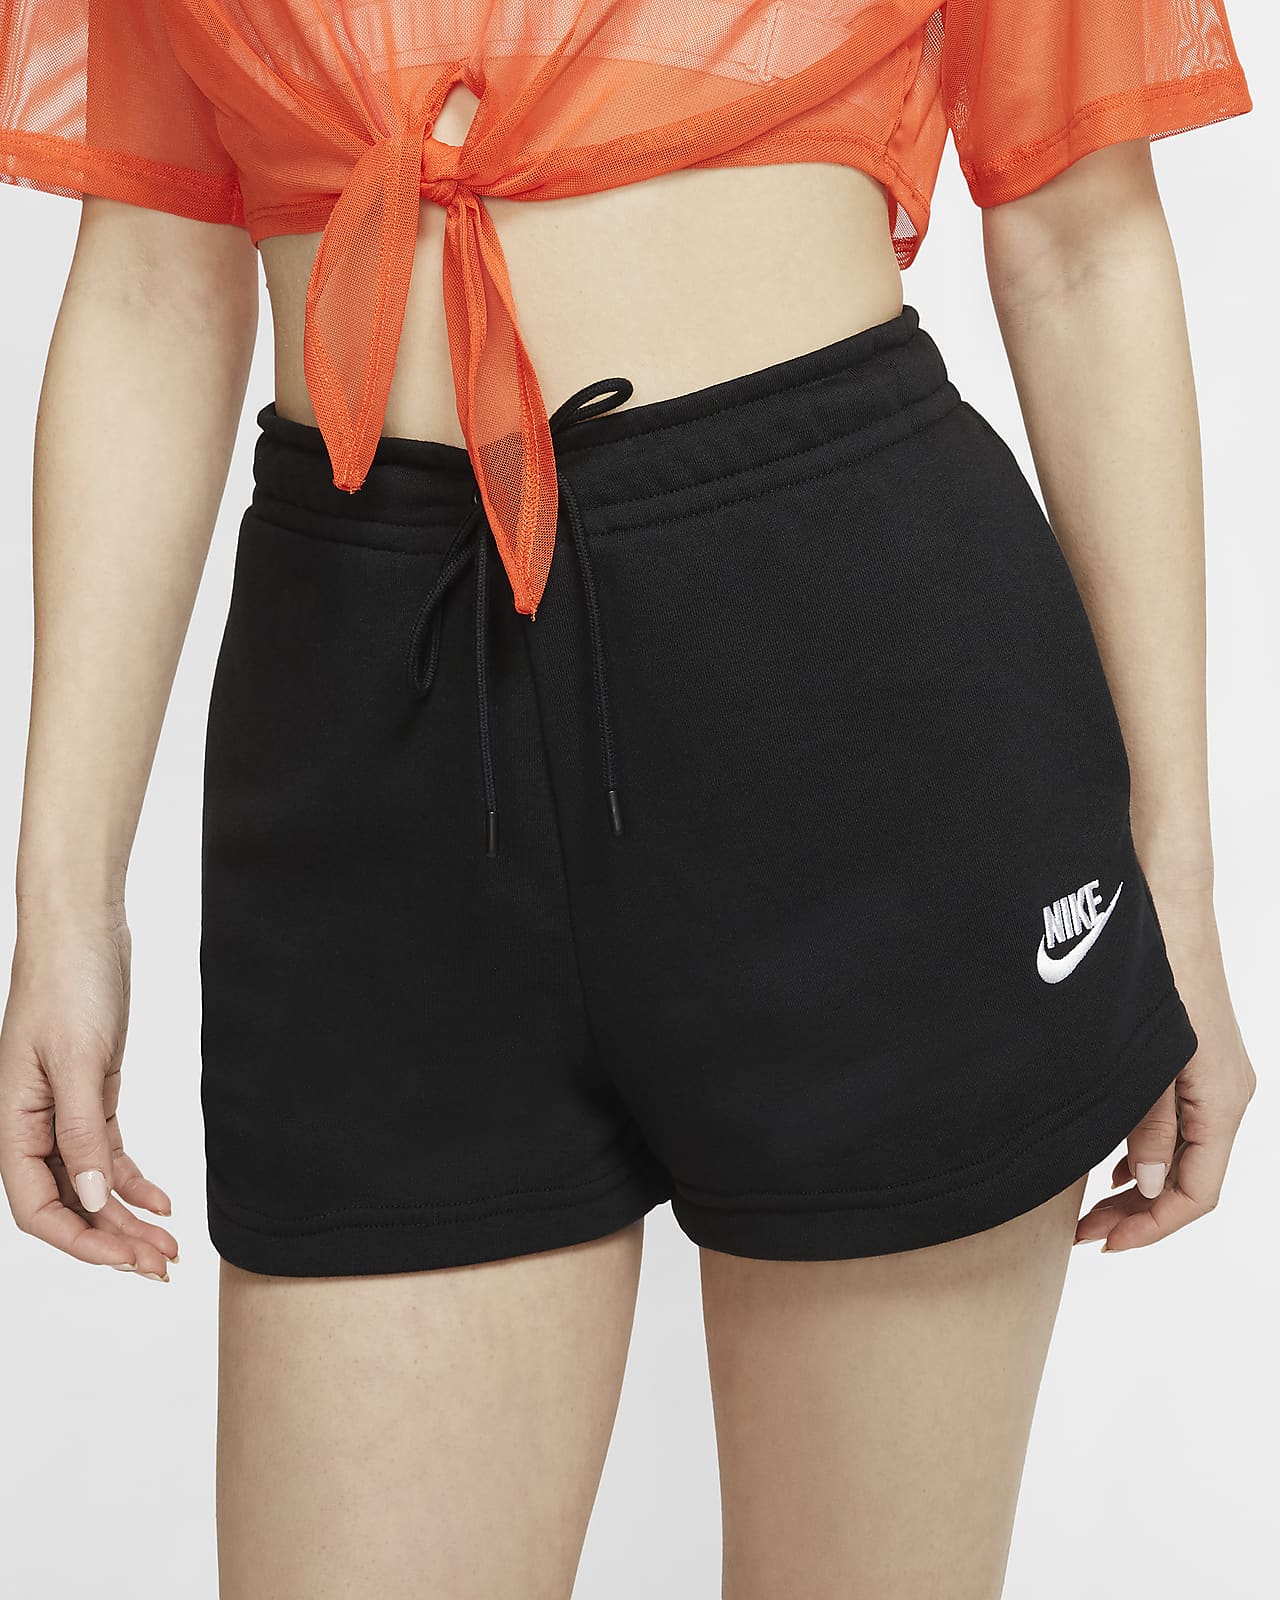 French Terry Shorts. Nike JP